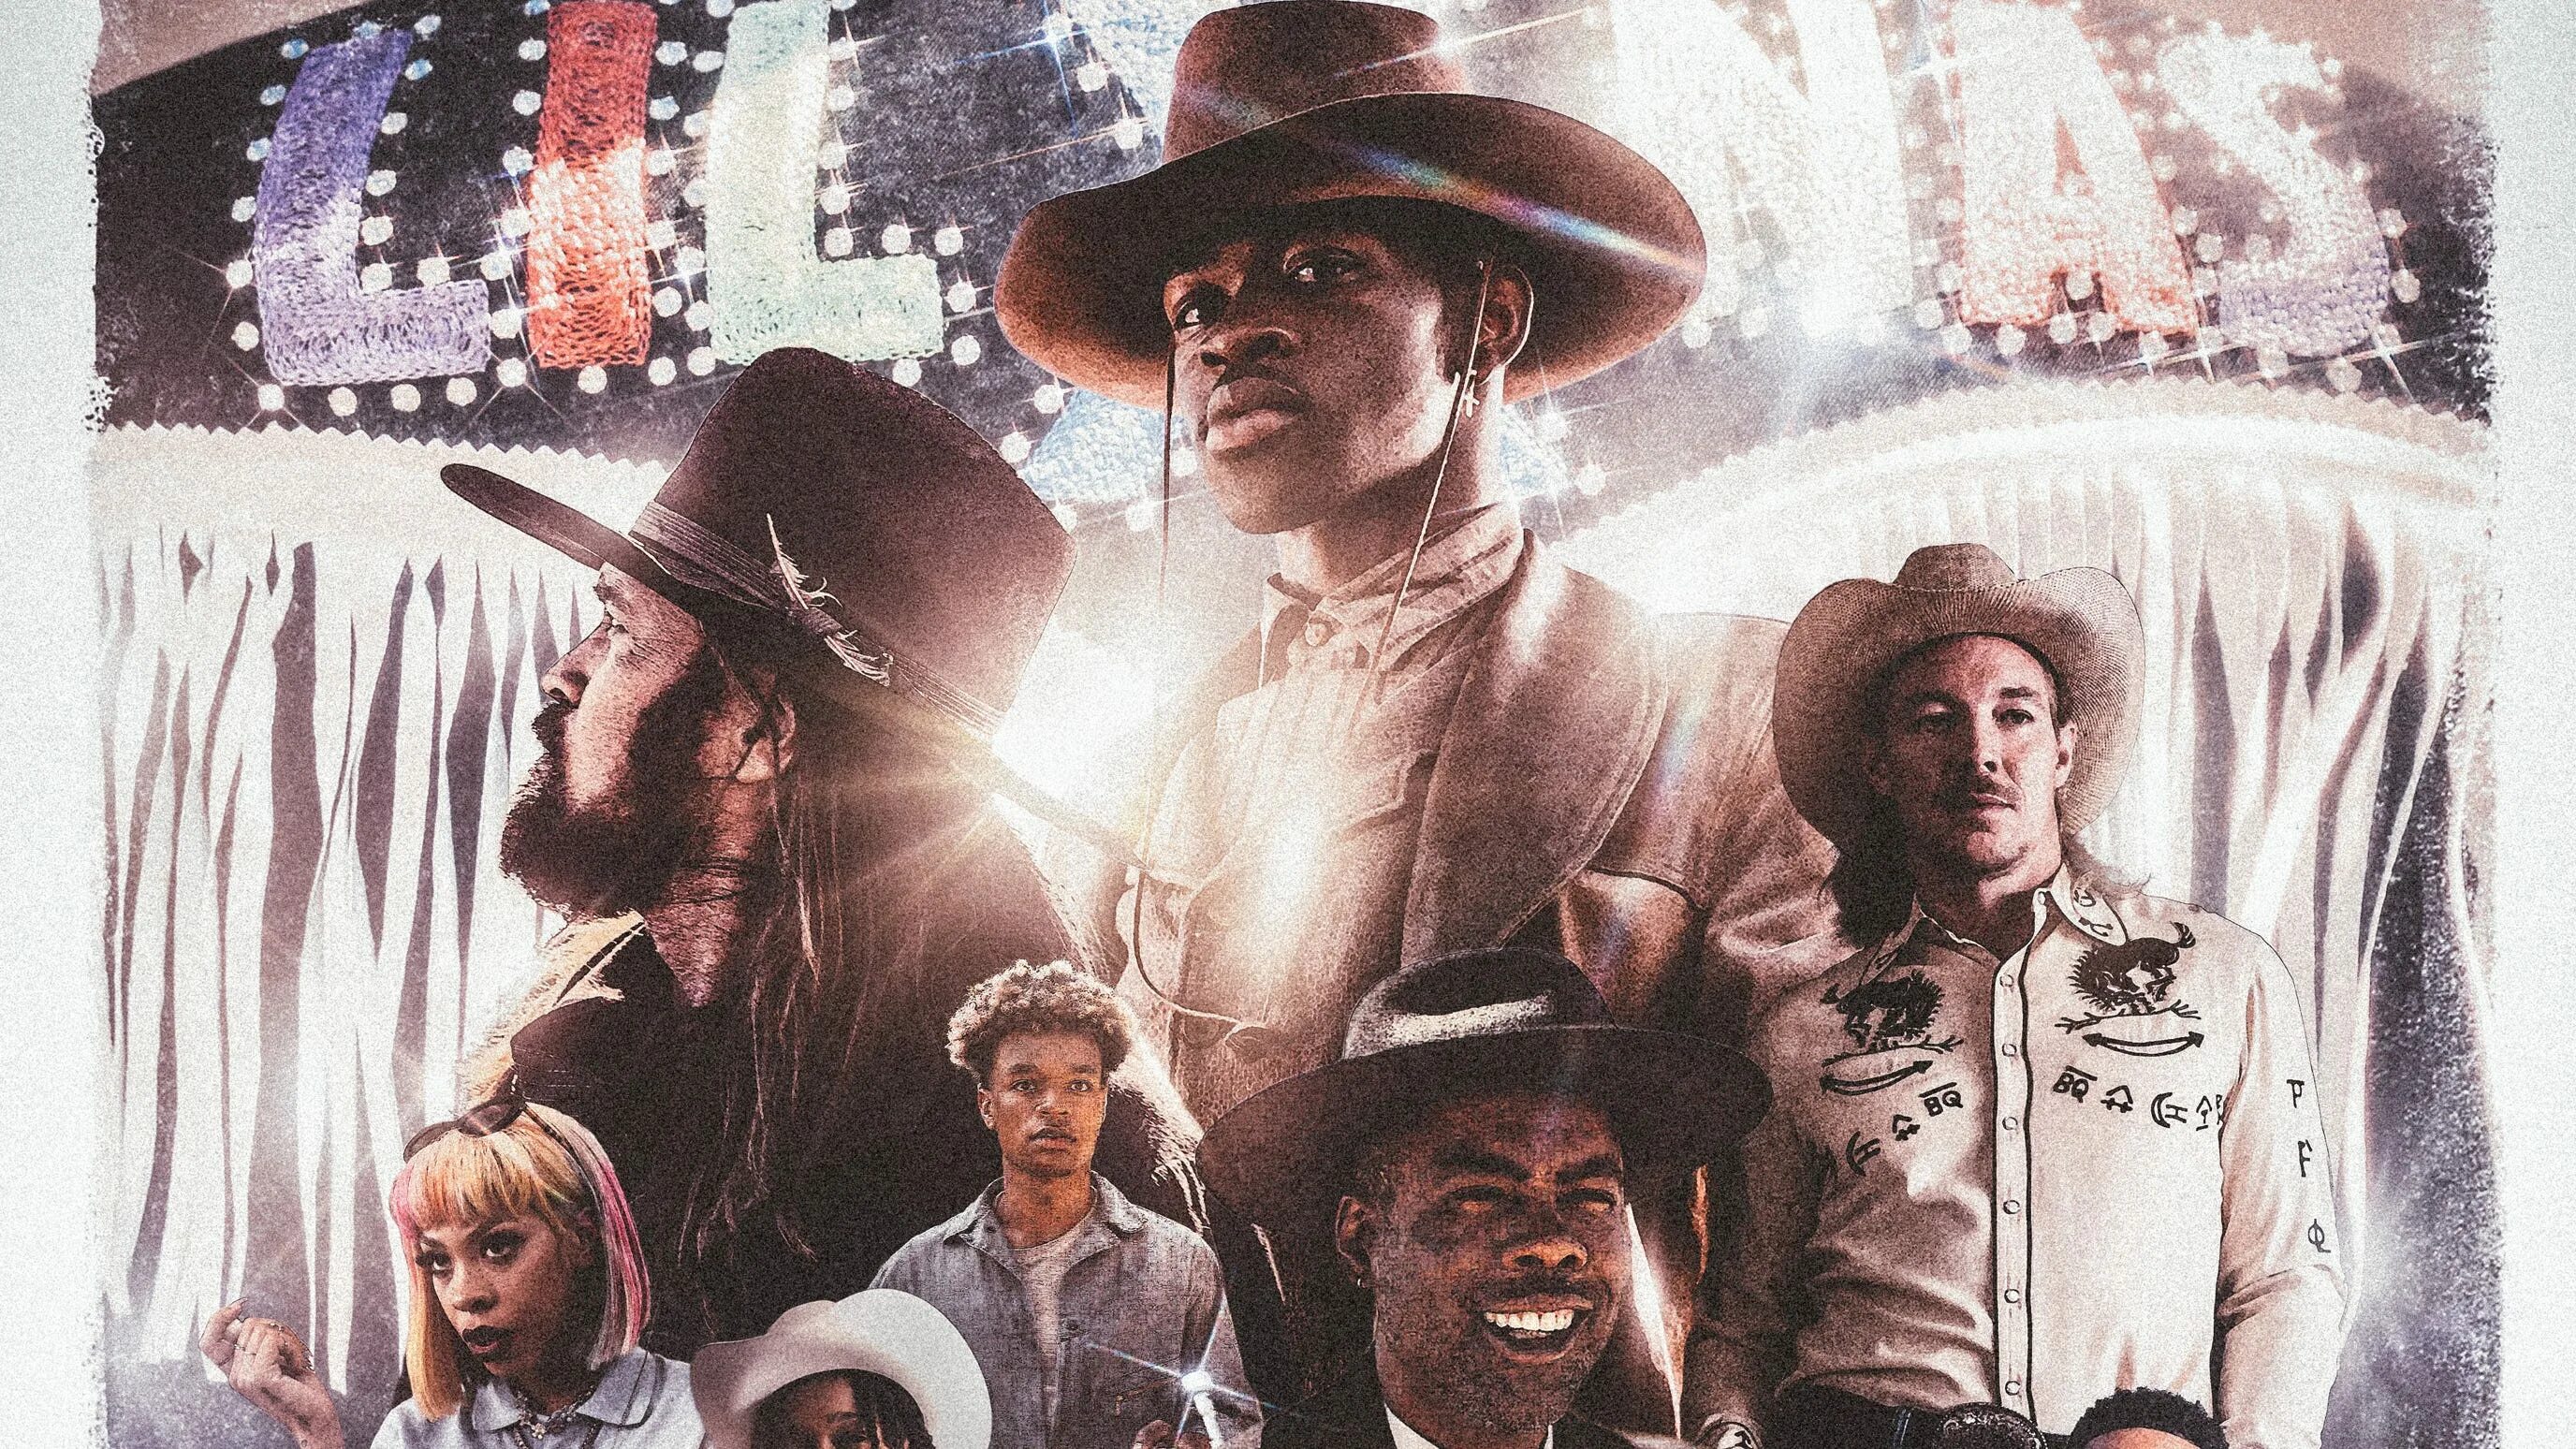 Билли old Town Road. Lil nas x - old Town Road (week 17 Version) ft. Old Town Road Official movie. Обложка песни old Town Road.